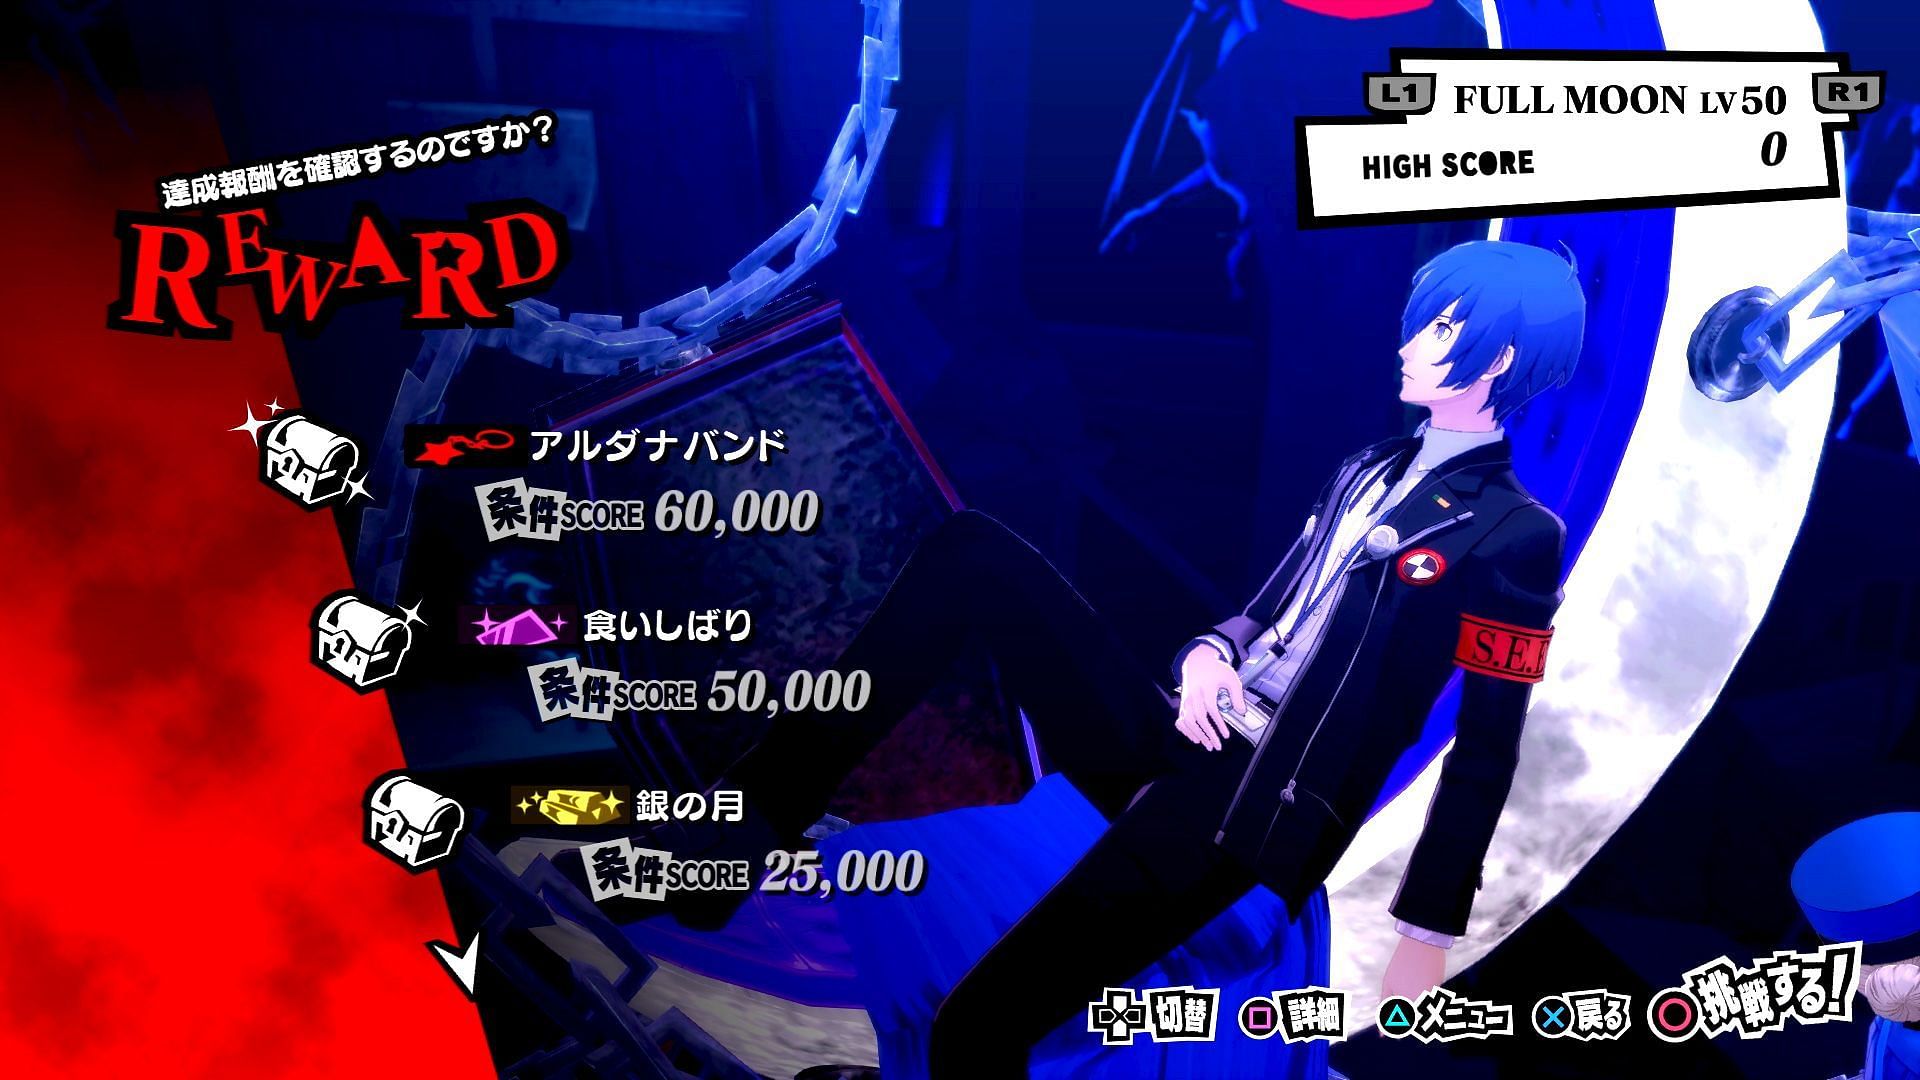 He recently appeared as a boss in Persona 5 Royal (Image via Atlus)